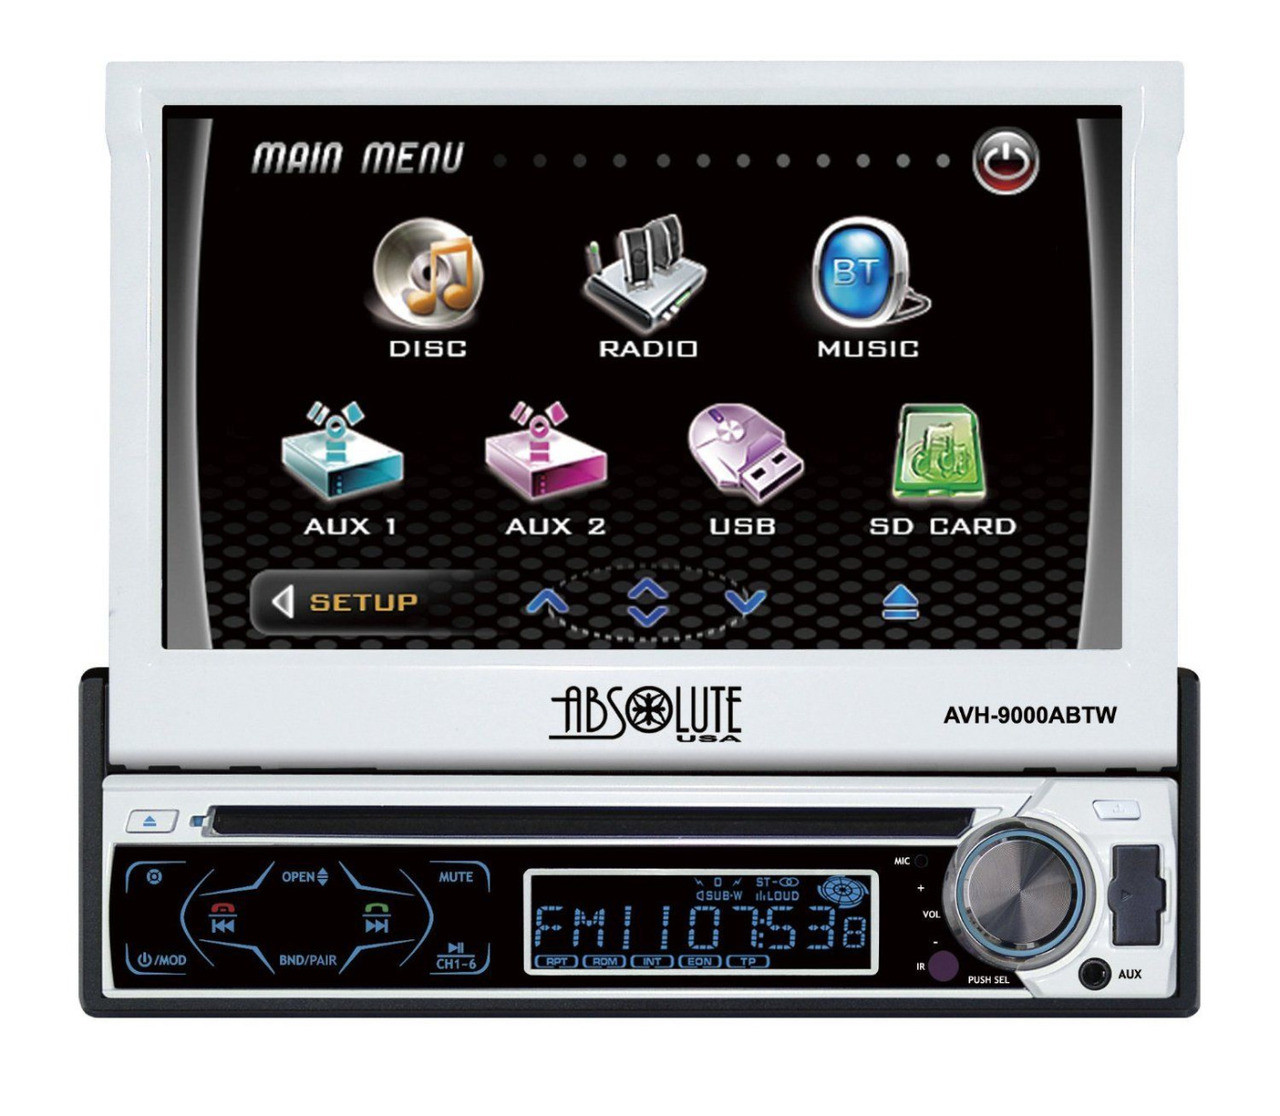 ABSOLUTE USA AVH9000ABTW IN DASH MULTIMEDIA DVD PLAYER RECEIVER (white)